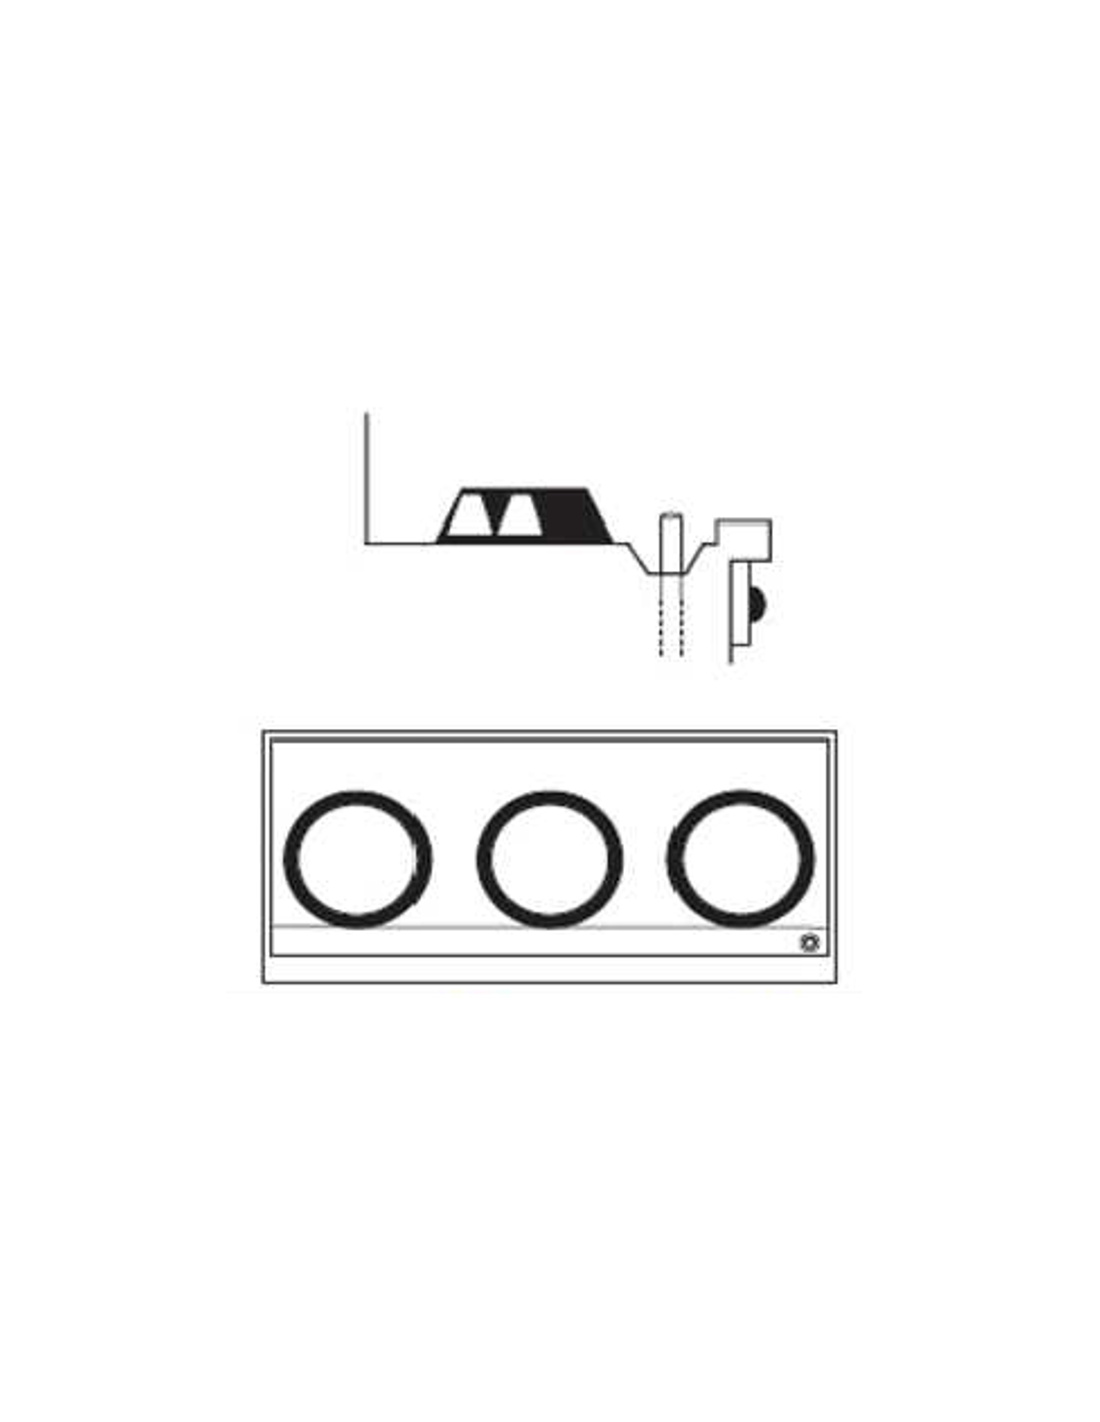 Rear channel with exhaust without floor washing system (without water jets)